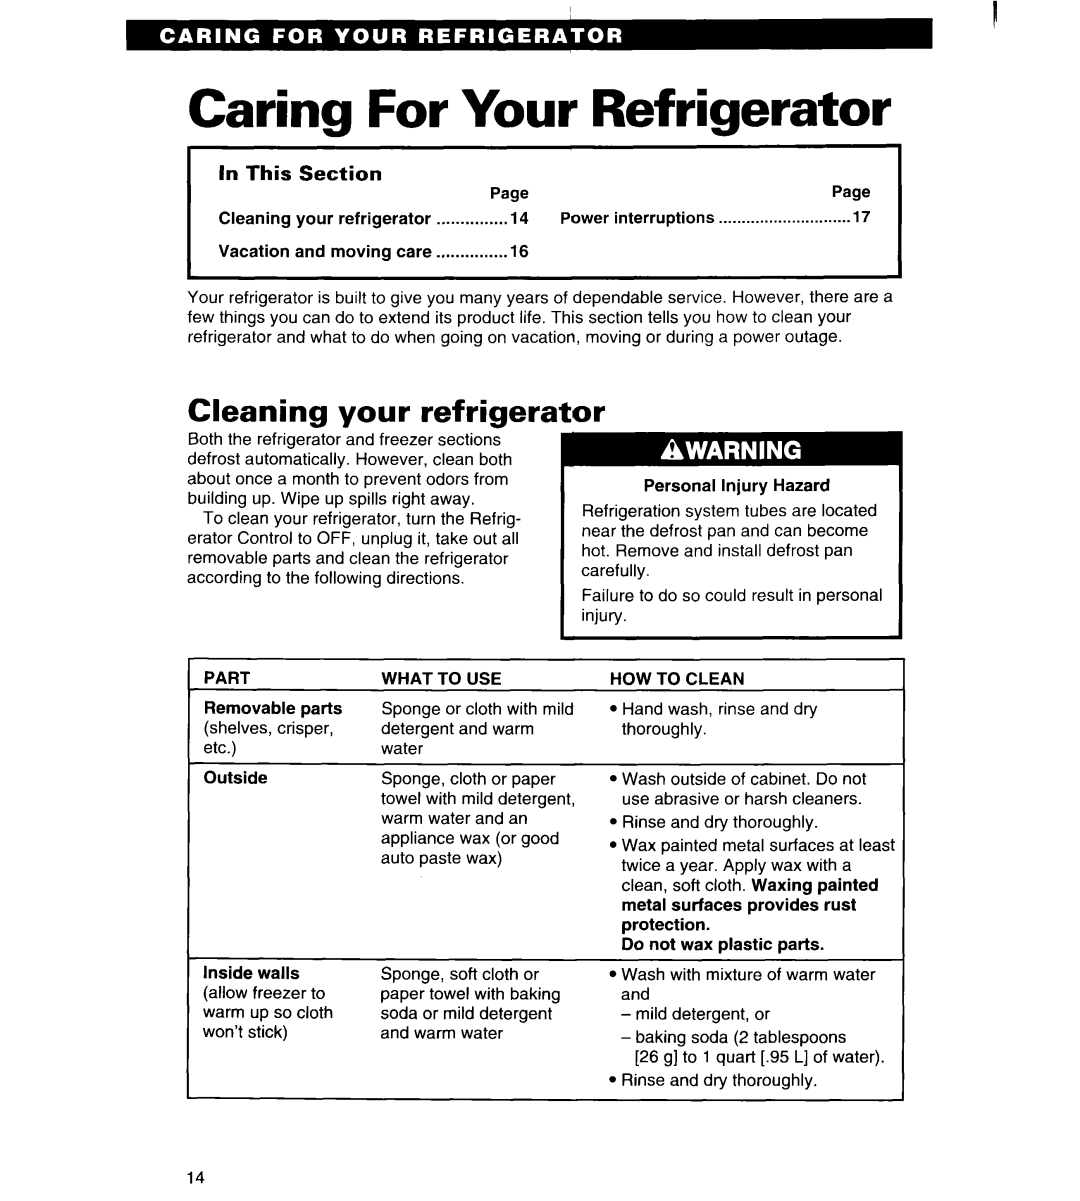 Estate IT18HD, LTL8HA Caring For Your Refrigerator, Cleaning your refrigerator, In This Section 